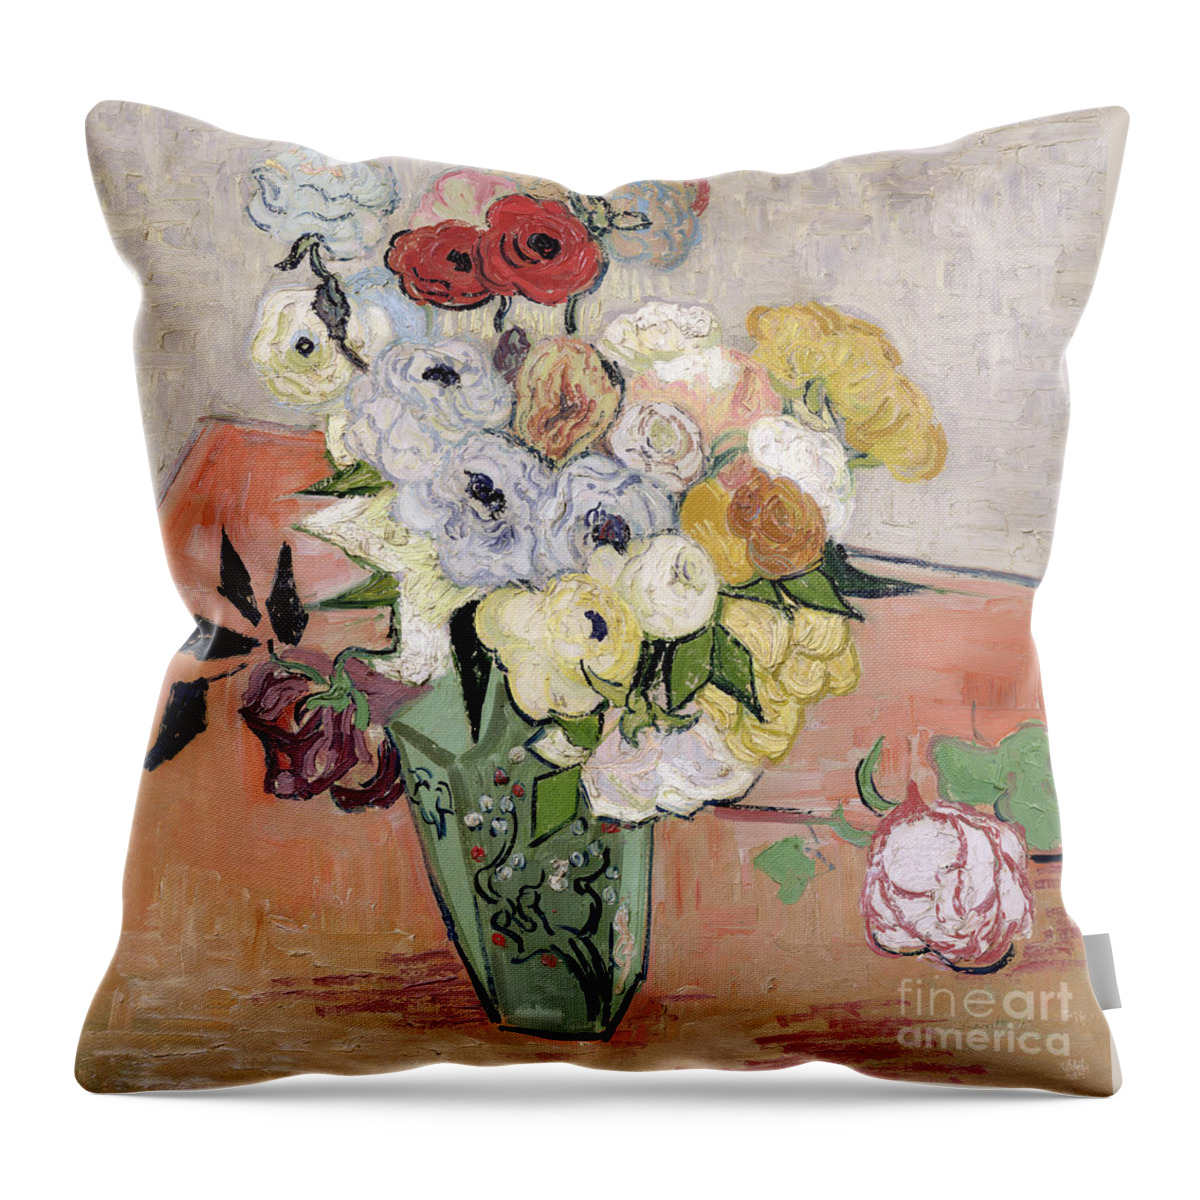 1890 Throw Pillow featuring the painting Japanese Vase with Roses and Anemones by Vincent van Gogh